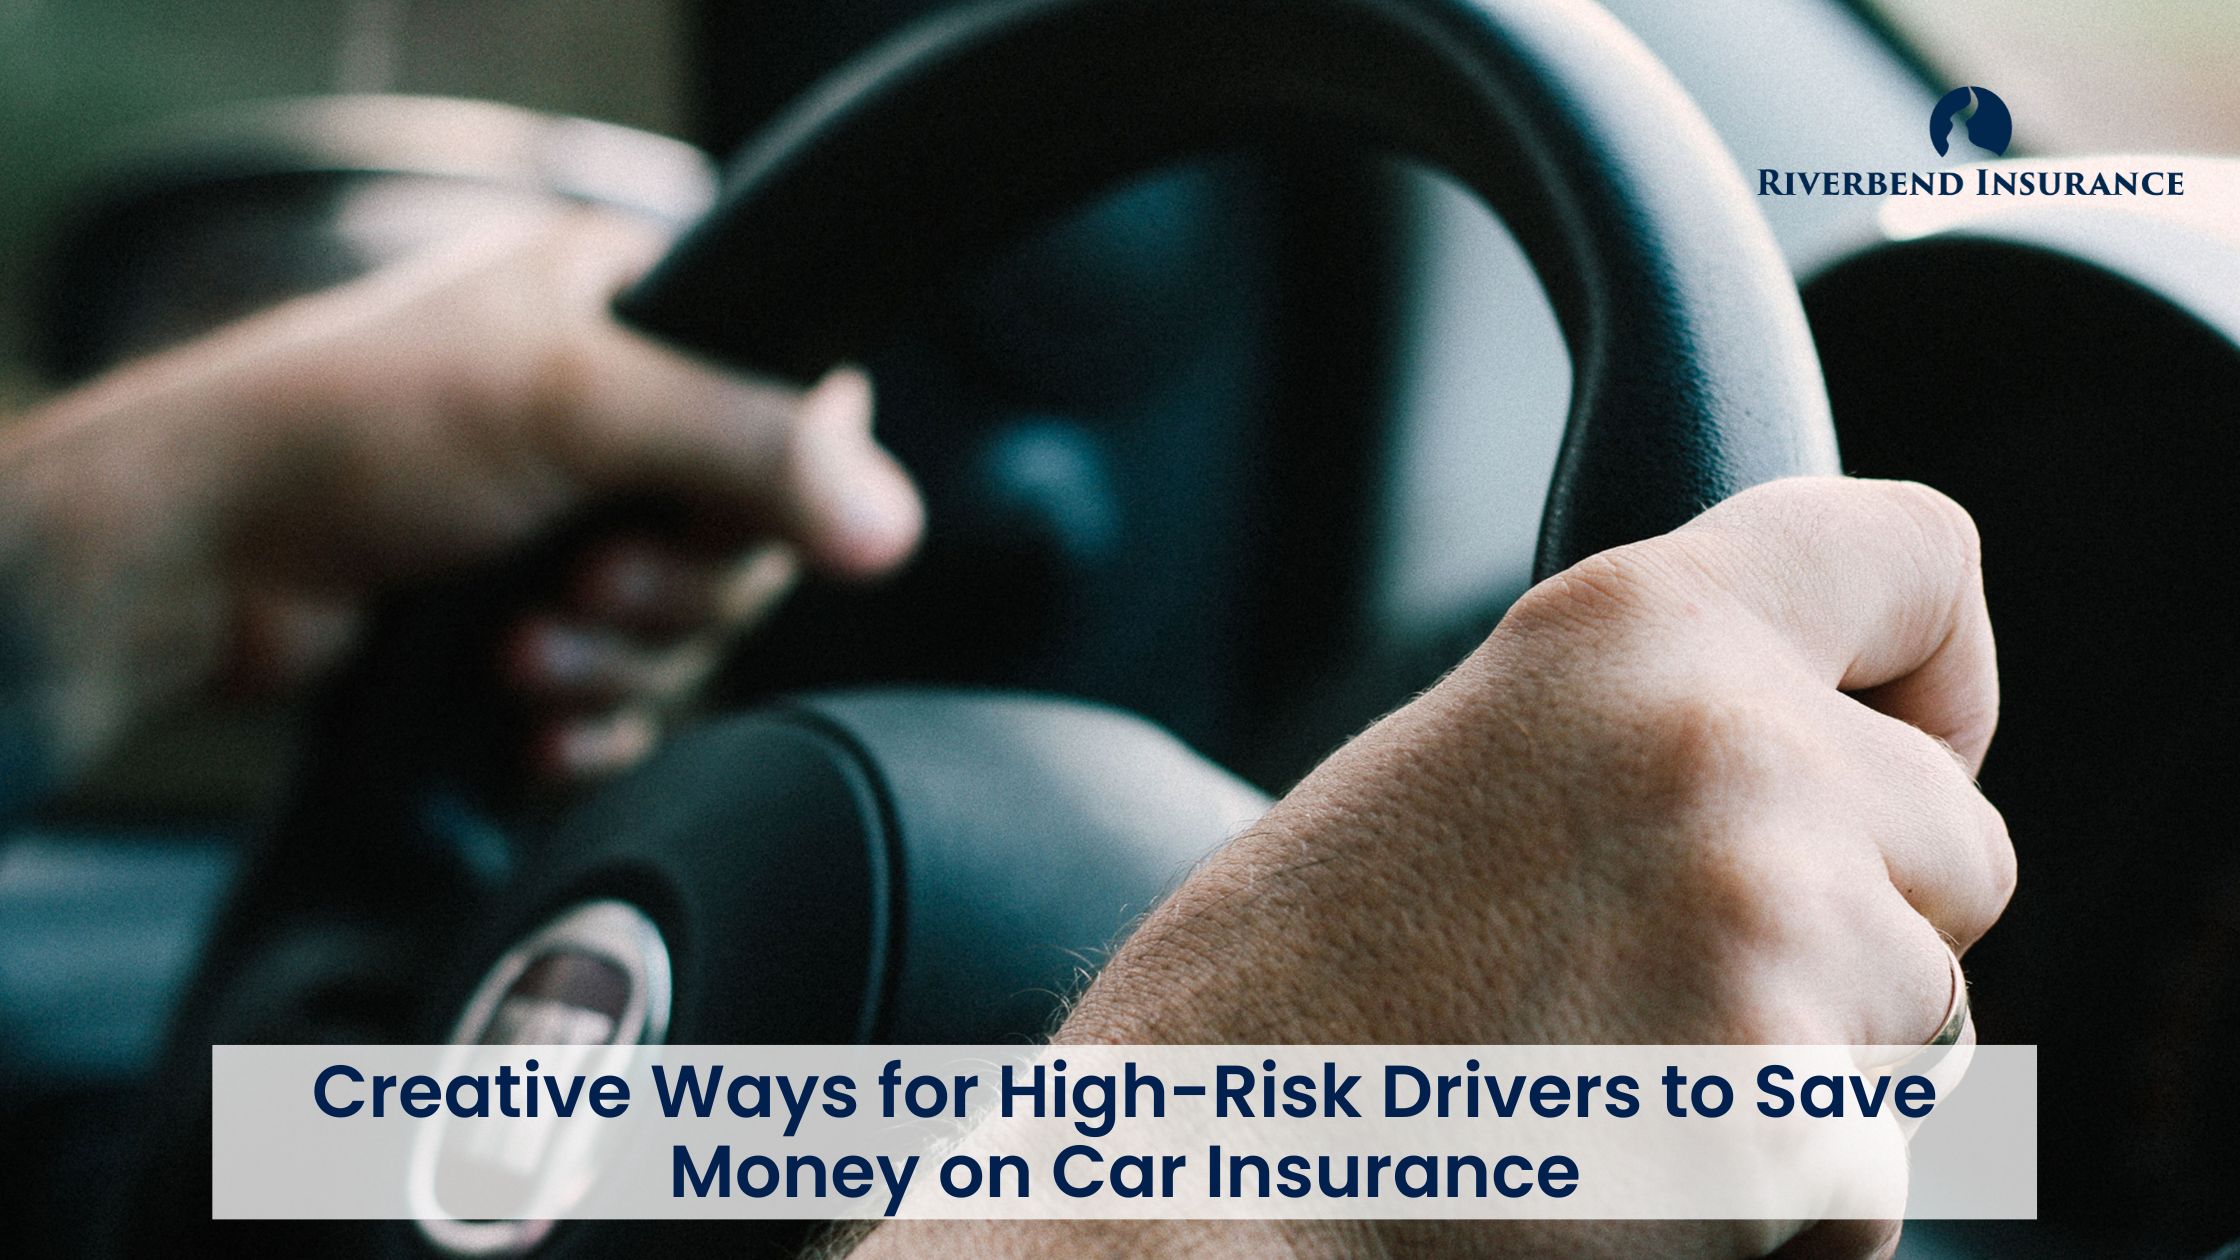 6 Creative Ways for High-Risk Drivers to Save Money on Car Insurance